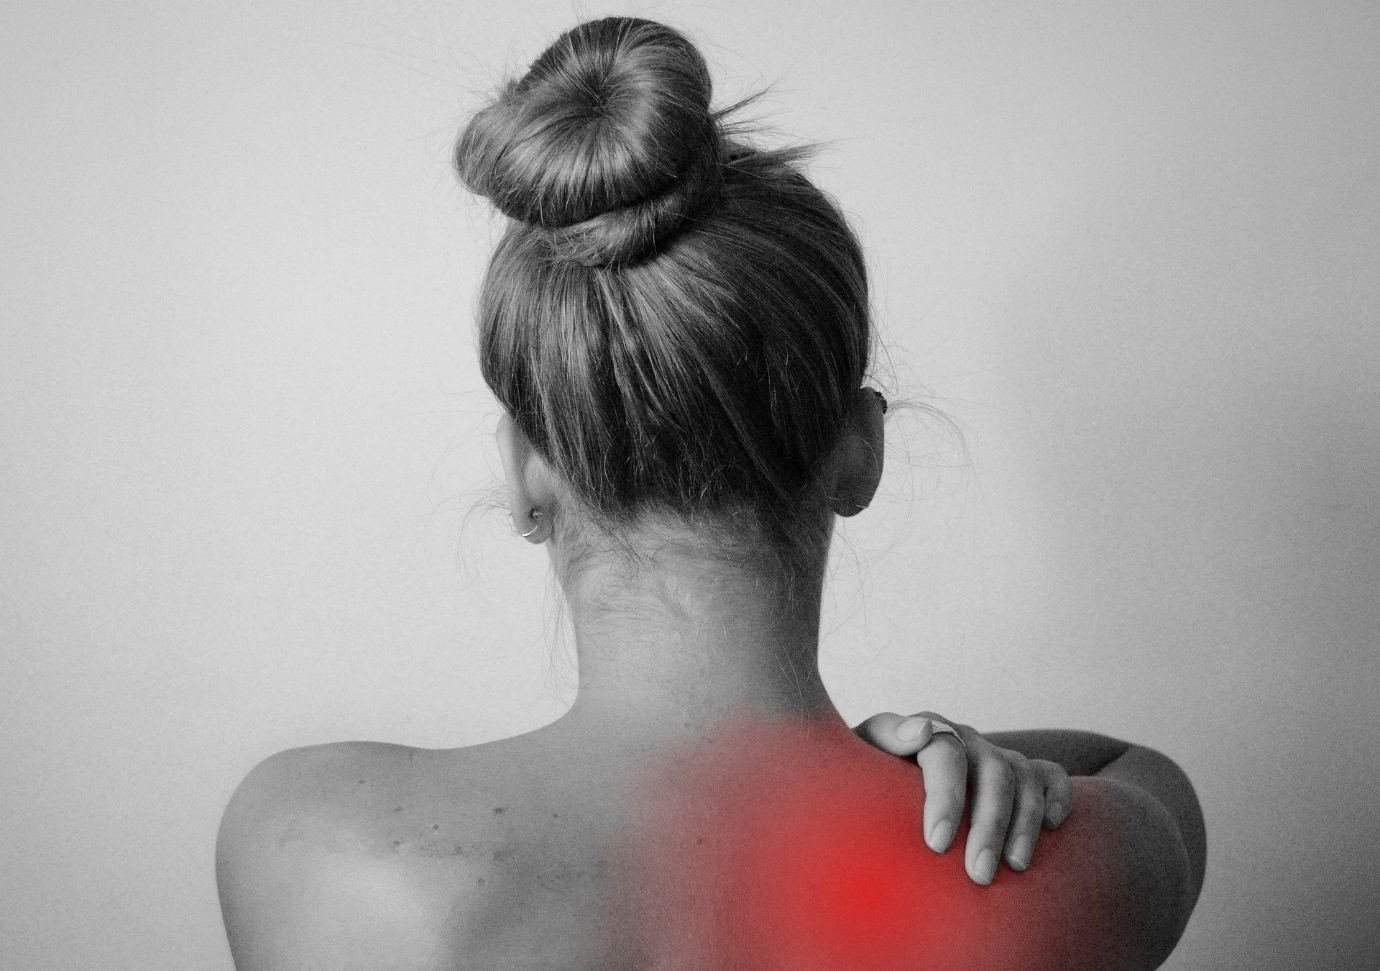 A person holding their neck/trapezius muscles, which are red indicating that they’re inflamed